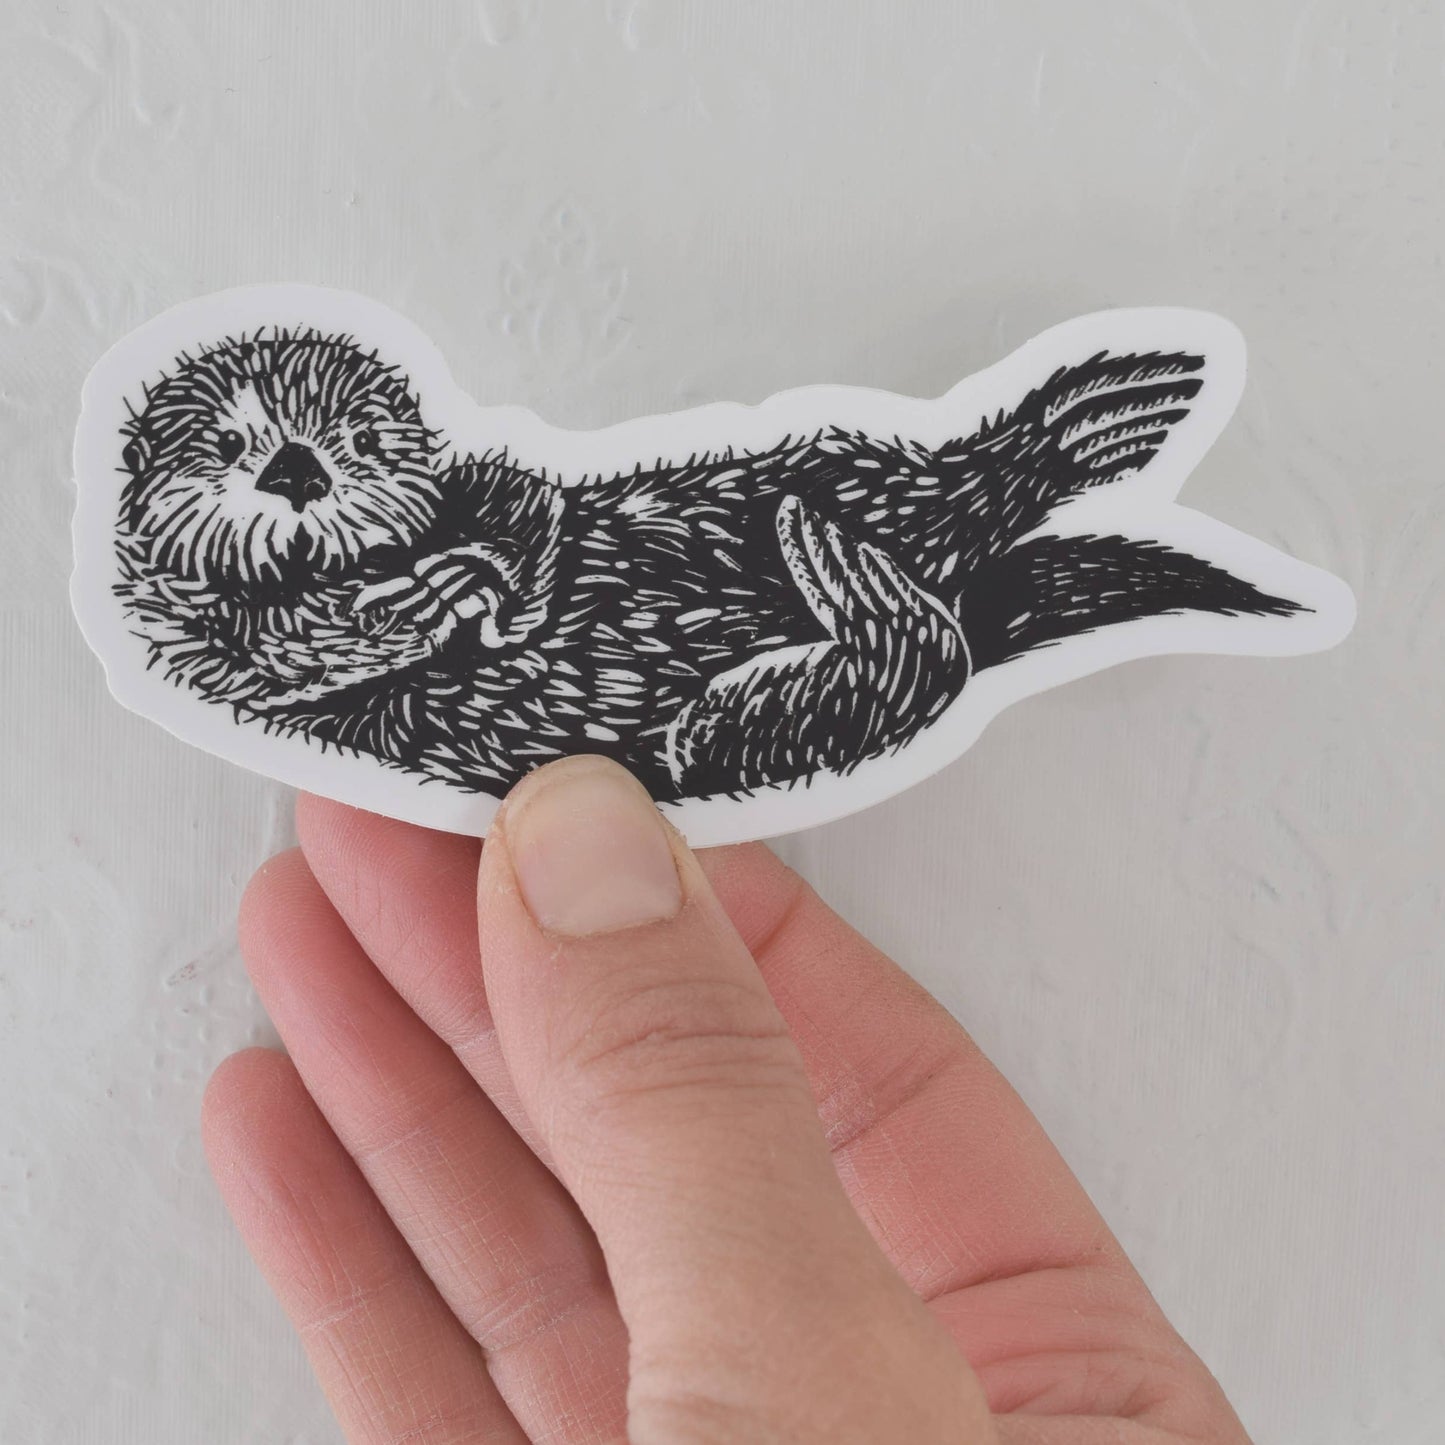 Otter Stickers - Vinyl Decal - 4" Wide